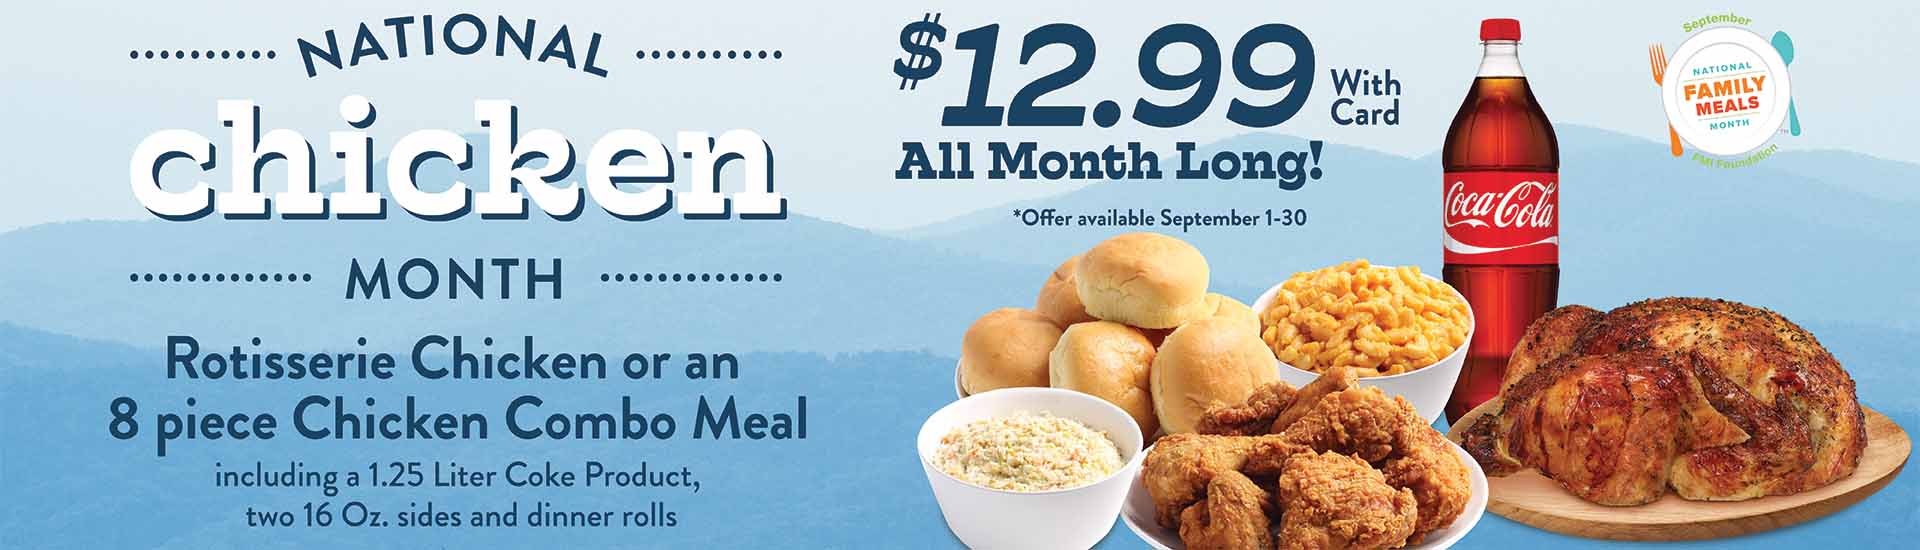 Grab a delicious meal for your family tonight from the Food City Deli. Select from 8 pieces of freshly prepared chicken or a whole rotisserie chicken, two side, rolls and a drink for only $12.99 this month. Family Meals made easy at your local Food City supermarket.